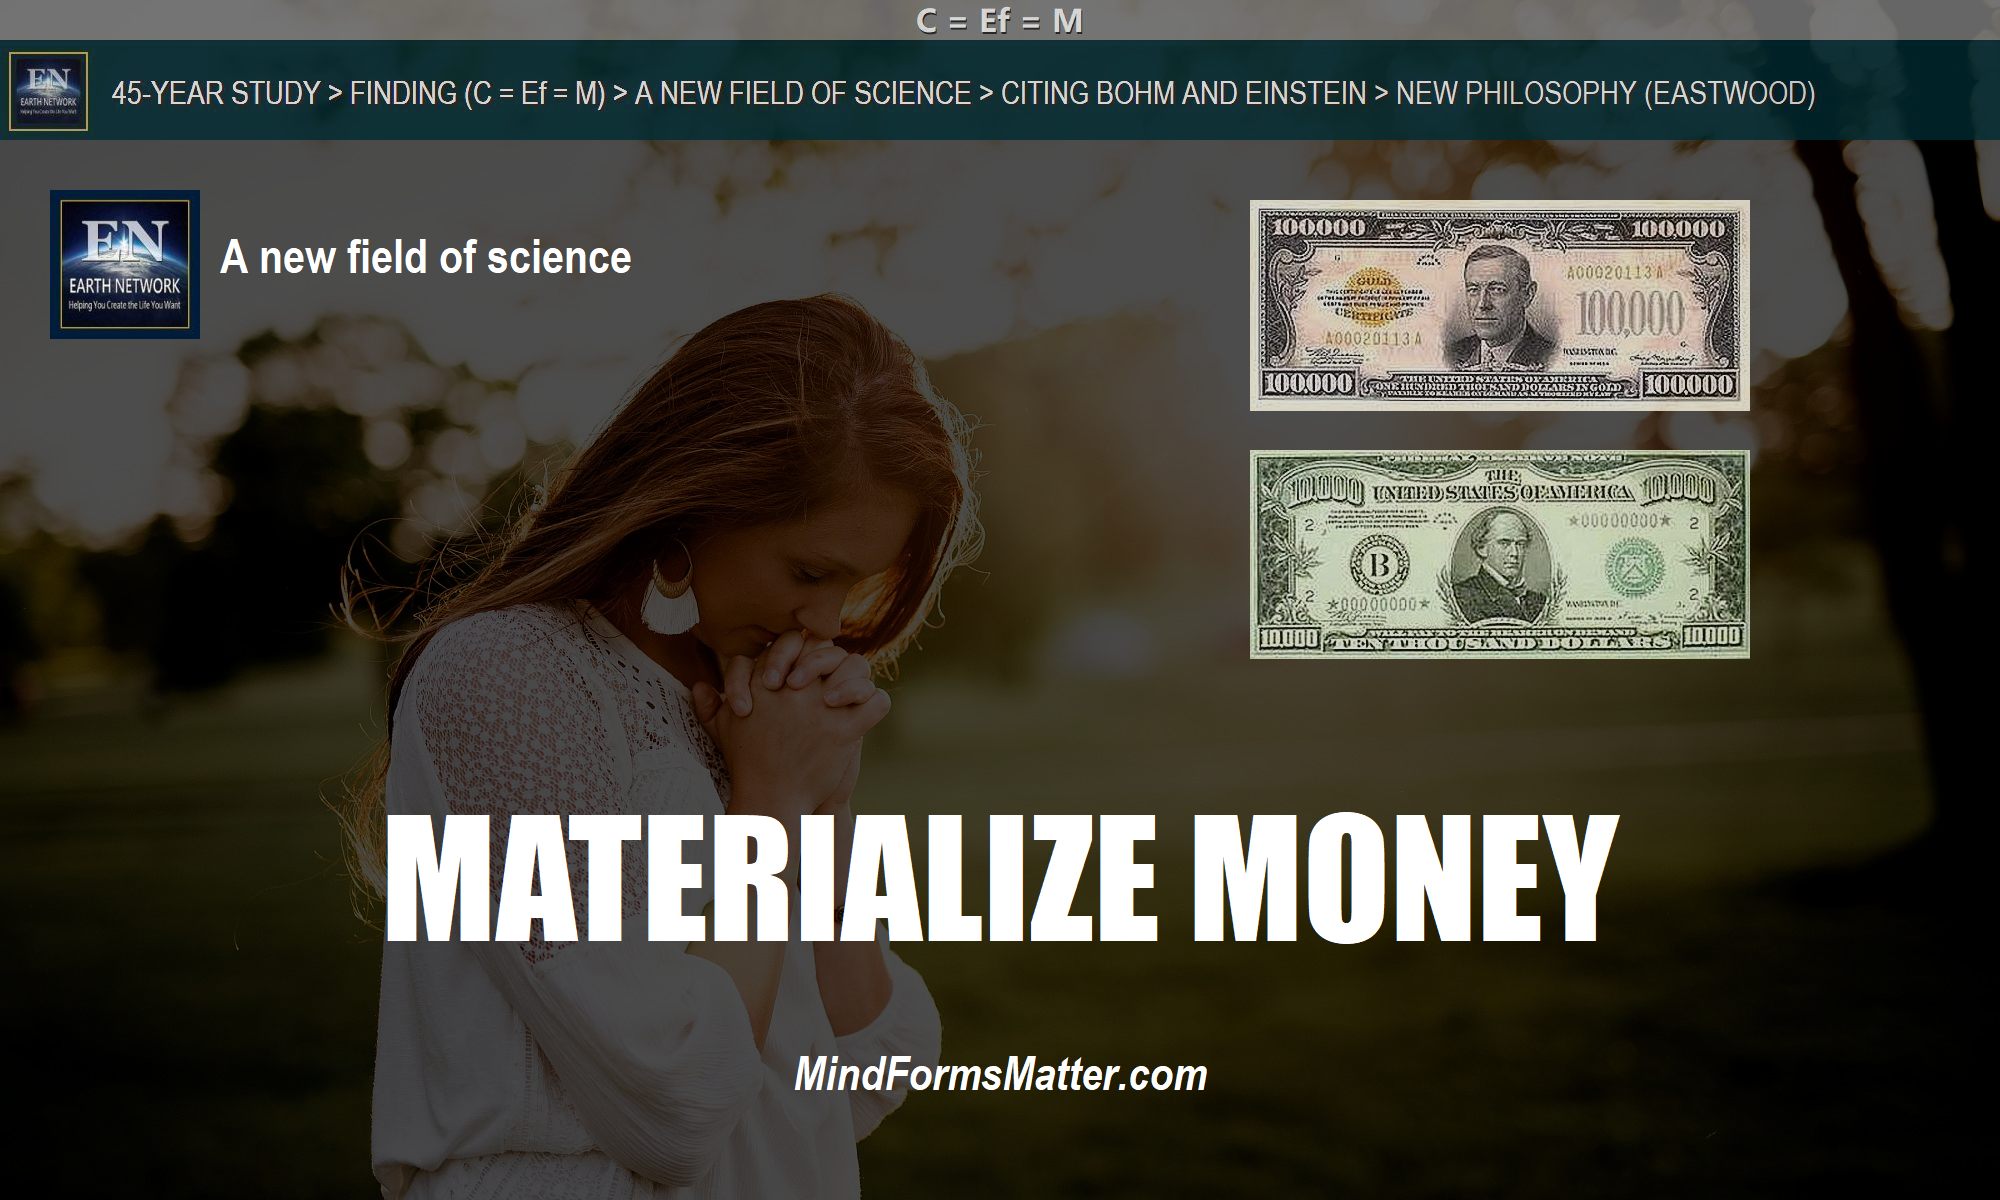 Woman praying knows how to manifesting cash and materializing money using metaphysics